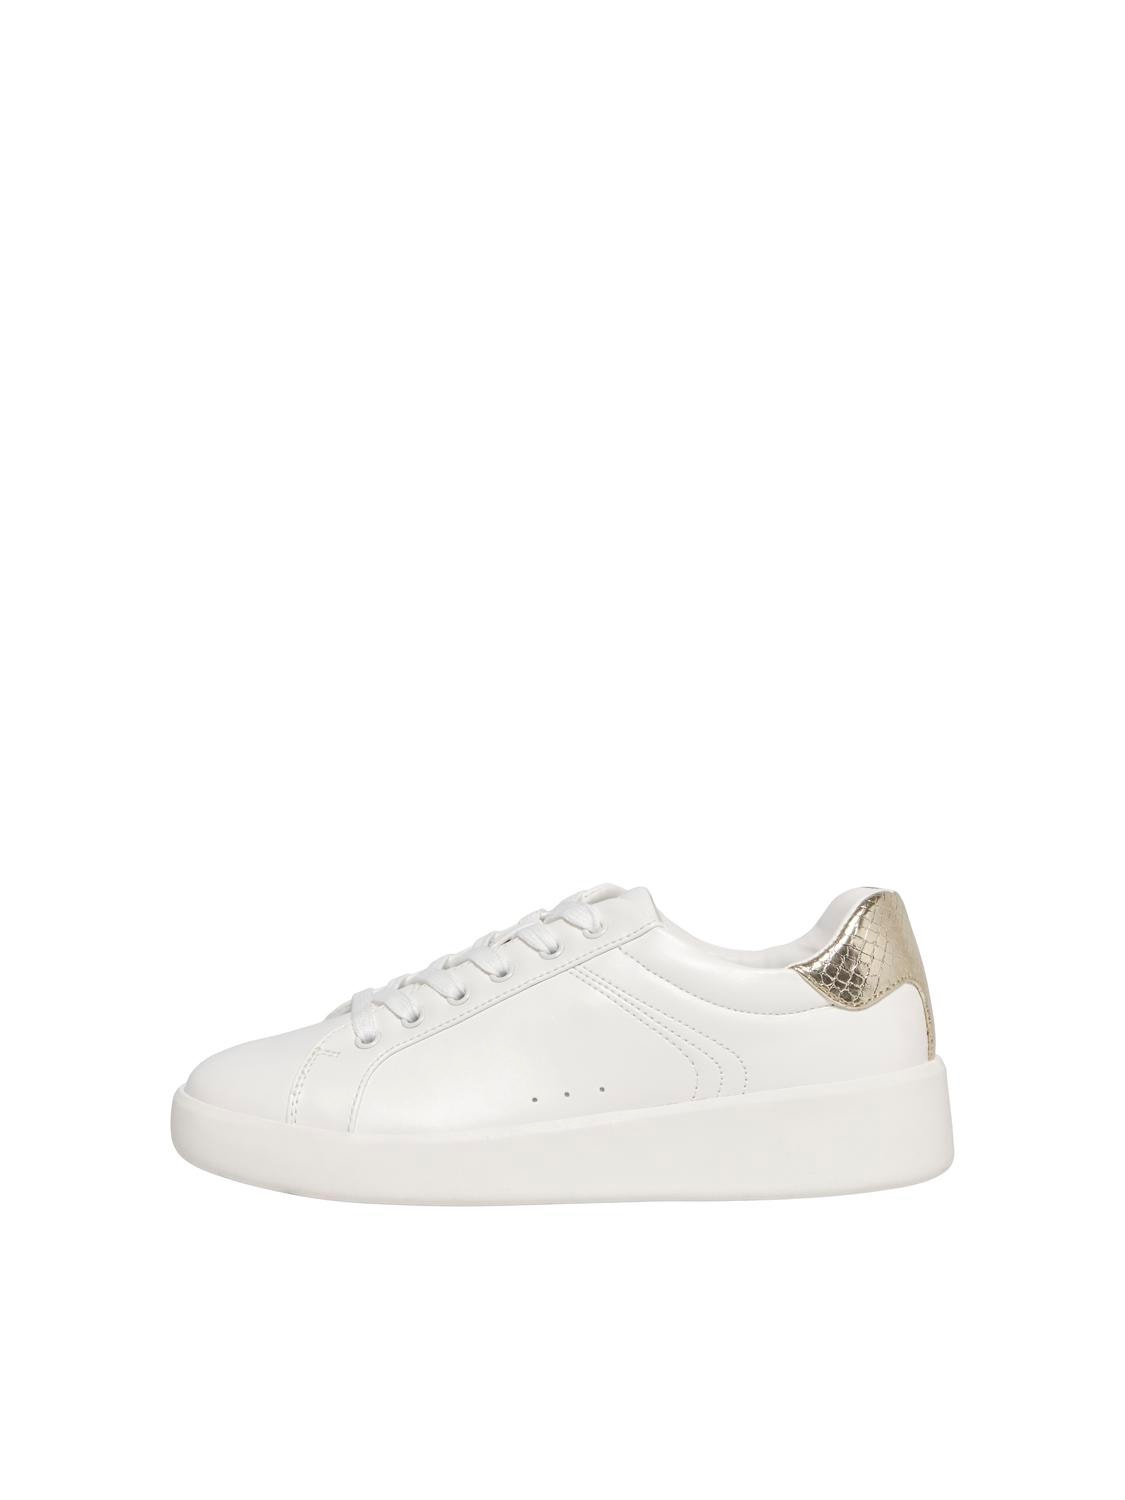 ONLY Faux leather Sneakers -White - 15252747